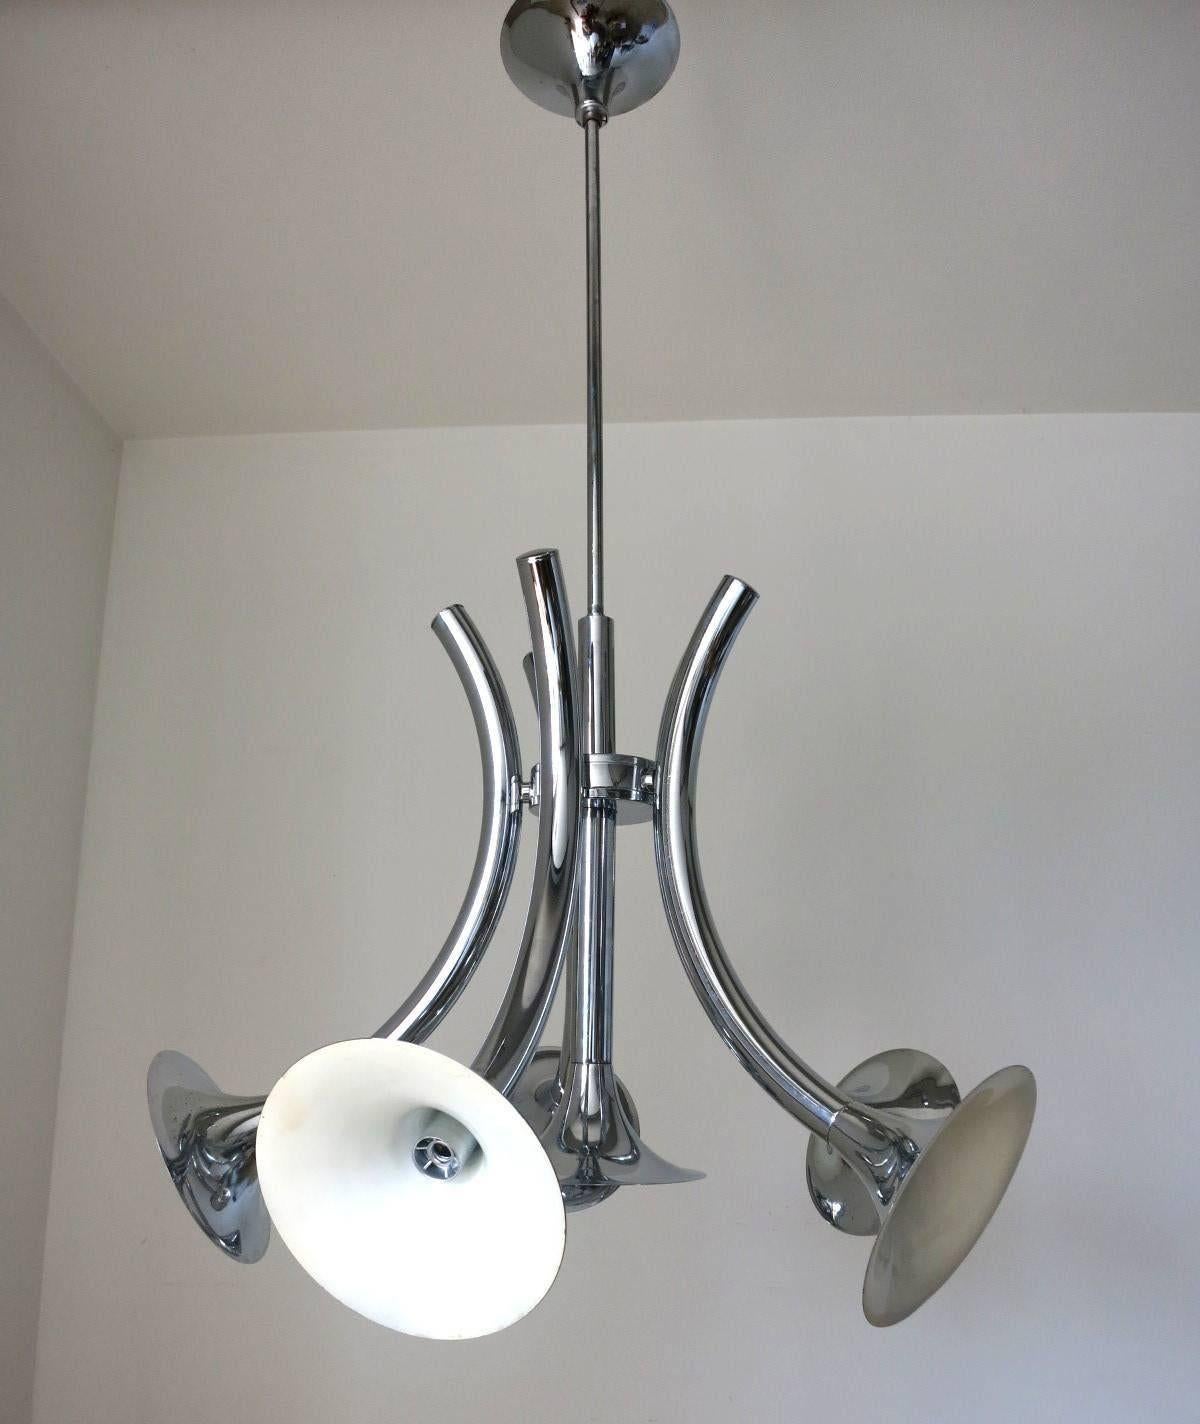 Vintage pendant made in Italy in the 1970's consisting of a unique trumpet design with 5 arm lights and a center light. Inside the chrome trumpets you can distinguish an enameled cream tone.
*Rewired to fit US Lighting Standards
Dimensions:
39